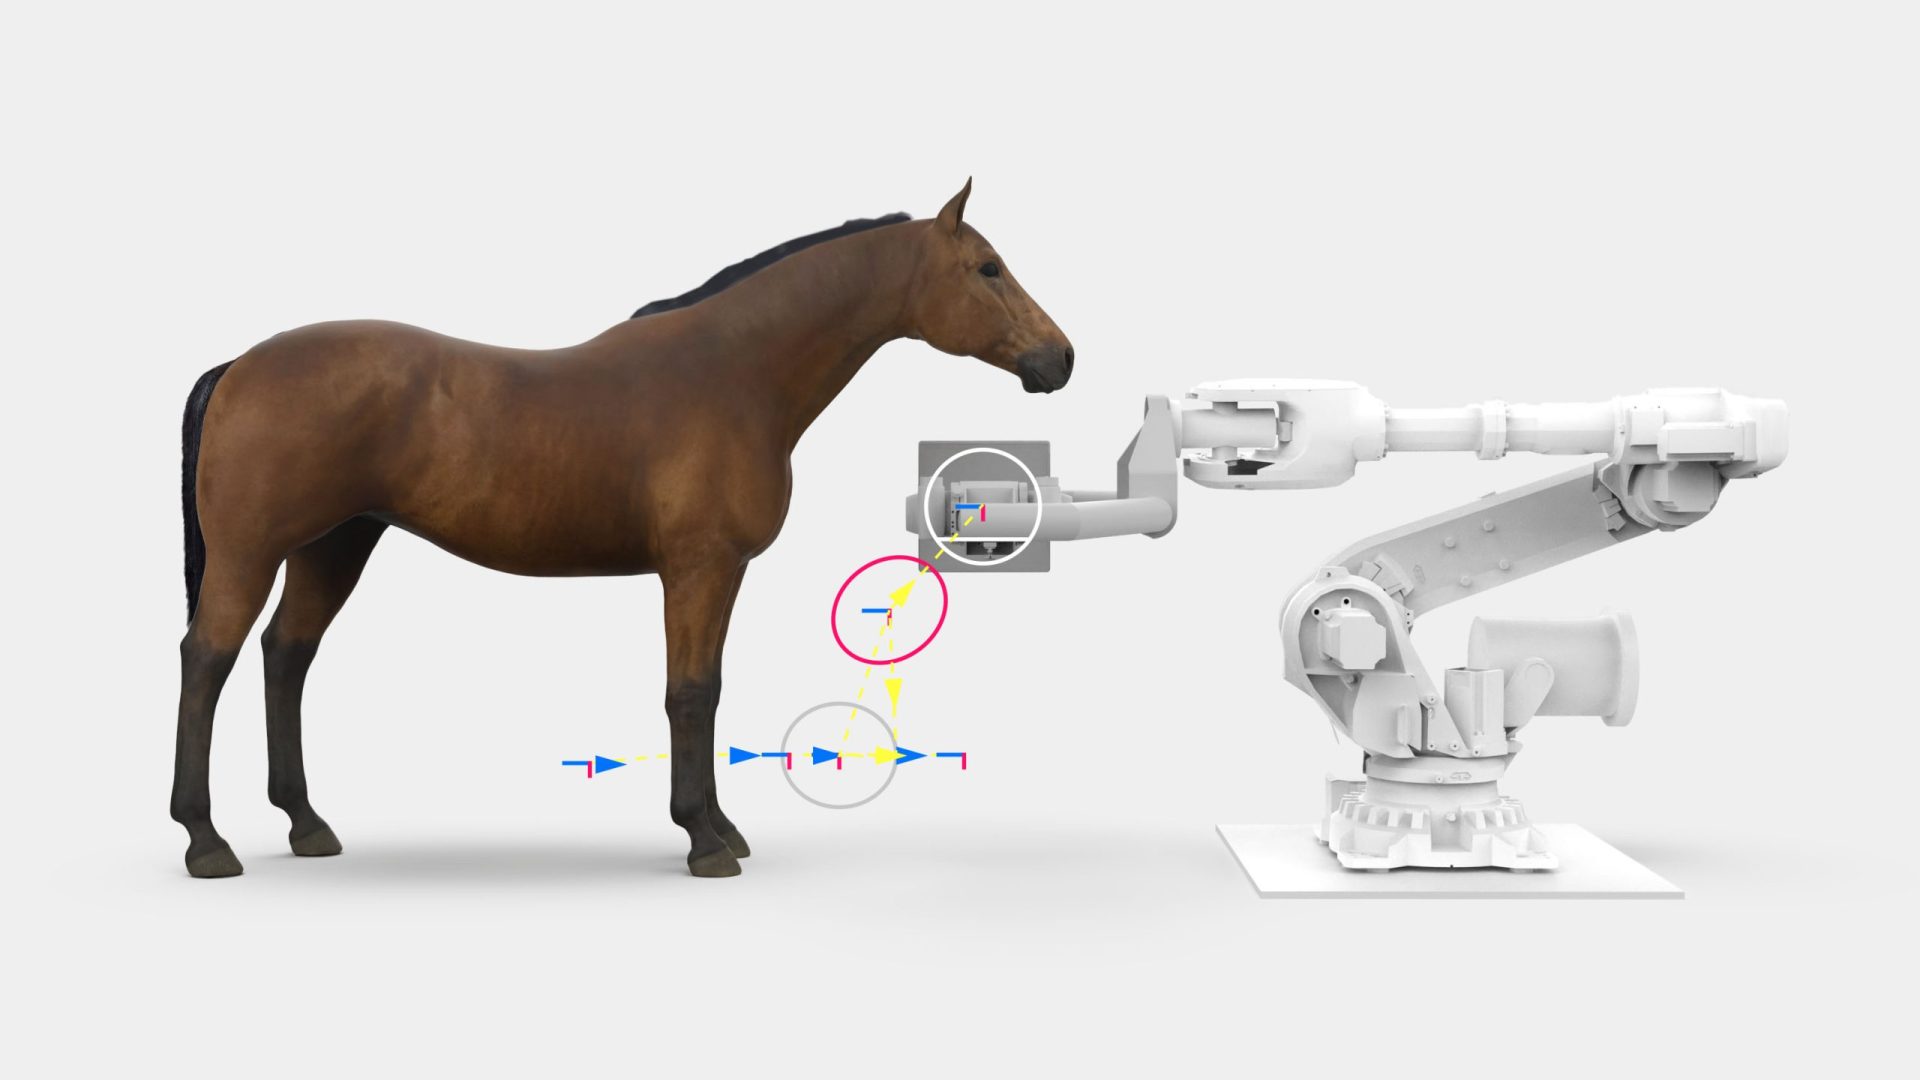 A horse standing next to Prisma Imaging's equine scanner mounted to a robotic arm with graphical axis controls indicating motion directions to scan an injured front leg.